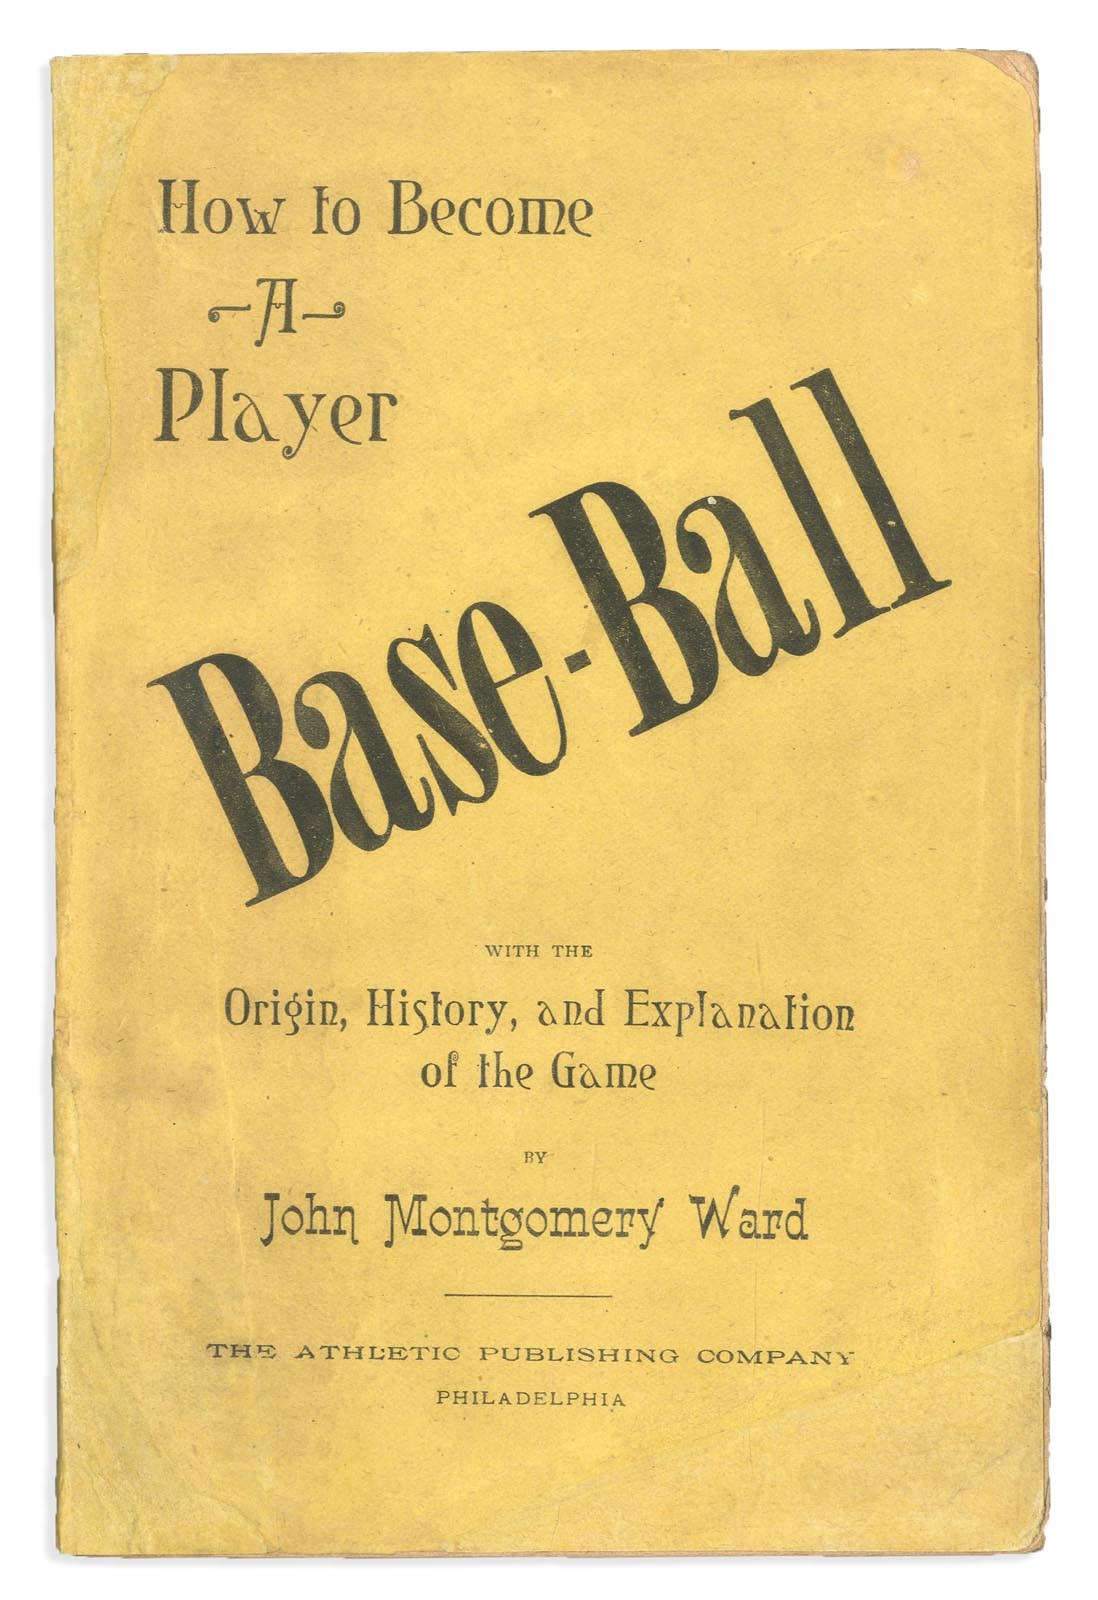 Early Baseball - 1888 "How to Become a Player" by John Montgomery Ward